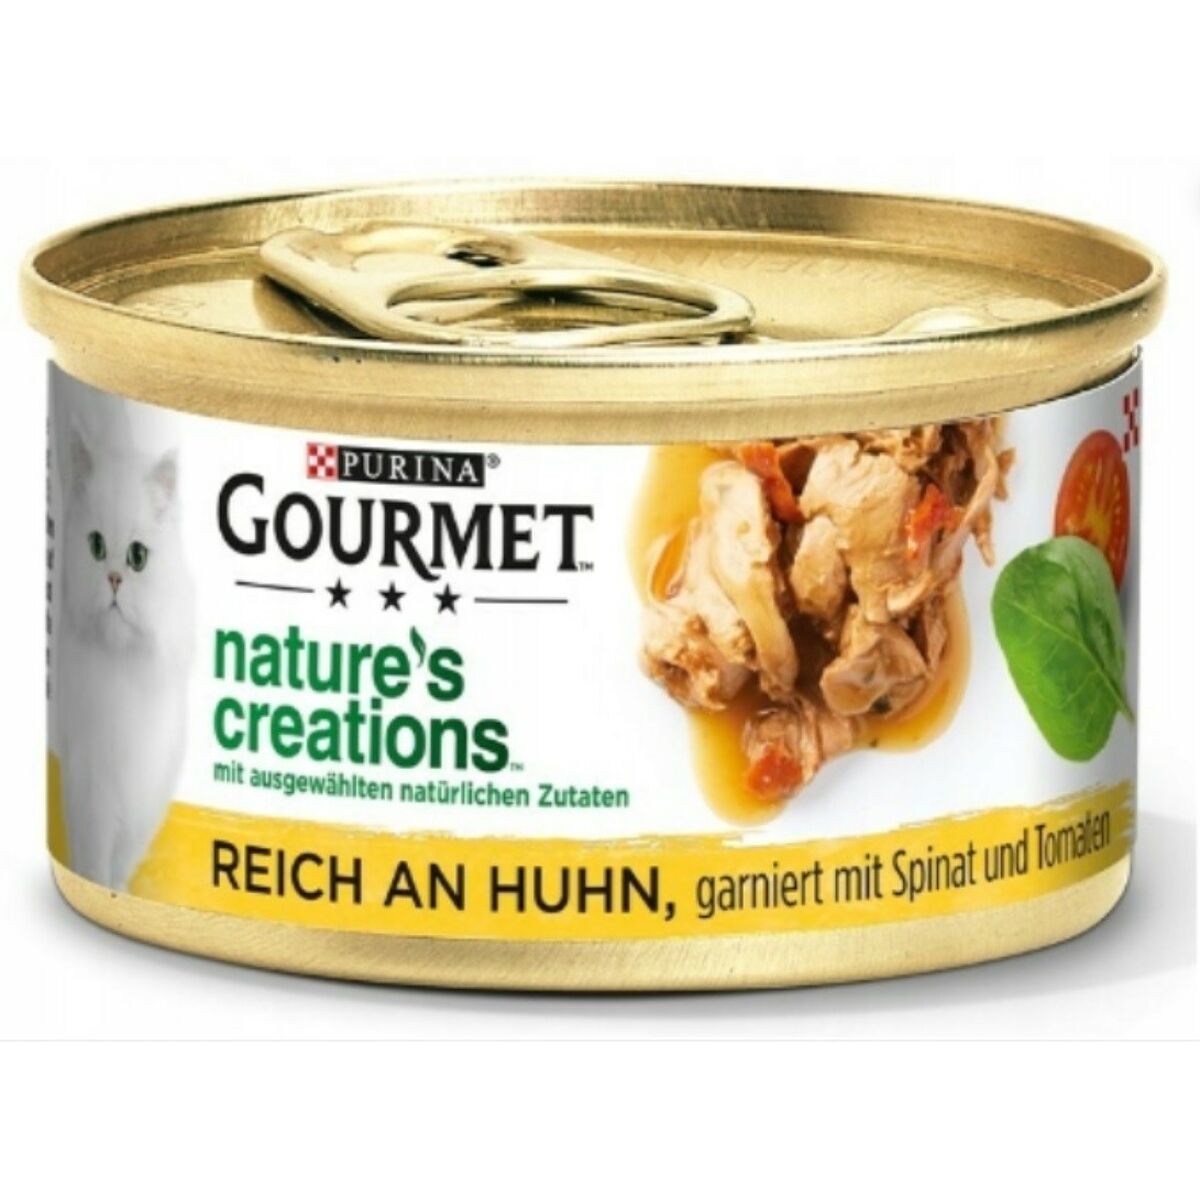 Aliments pour chat Purina Gourmet Poulet Epinards Tomate 85 g